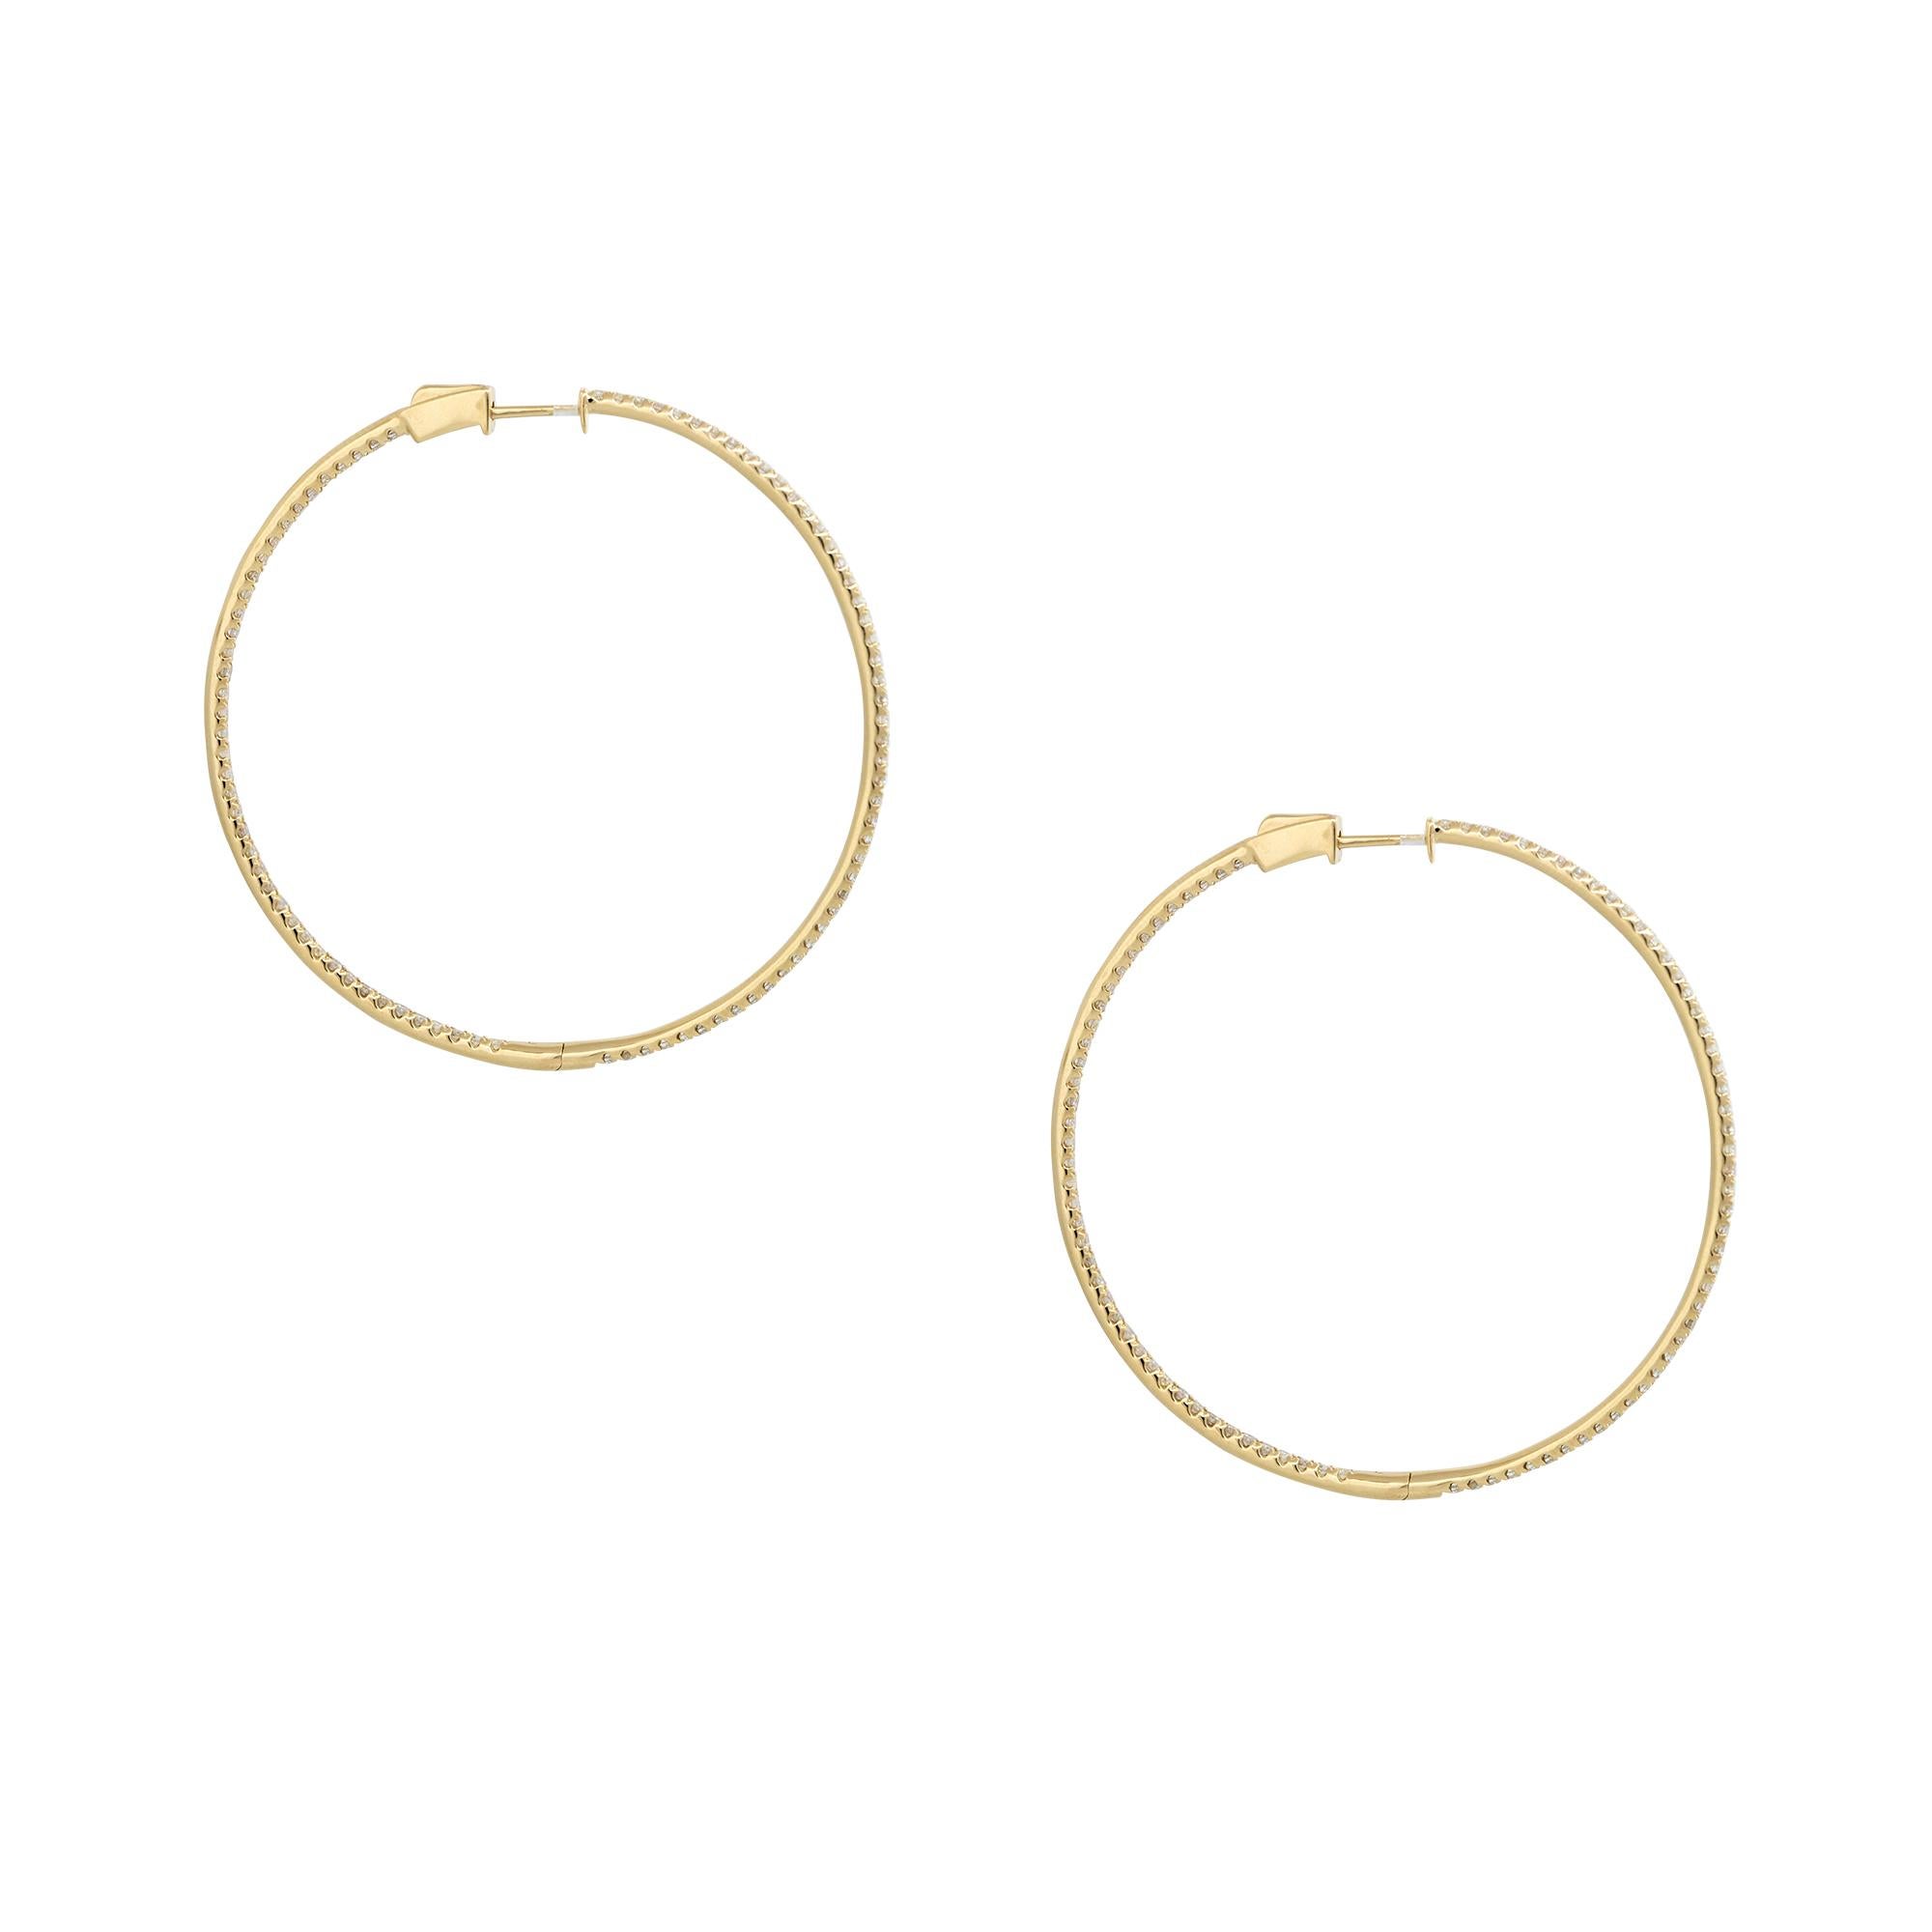 18 Karat Yellow Gold 1.92 Carat Round Brilliant Cut Diamond Large Hoop Earrings

Material: 18k Yellow Gold
Diamond Details: There are approximately 1.92 carats of Round Brilliant cut Diamonds. All diamonds are approximately G/H in color and